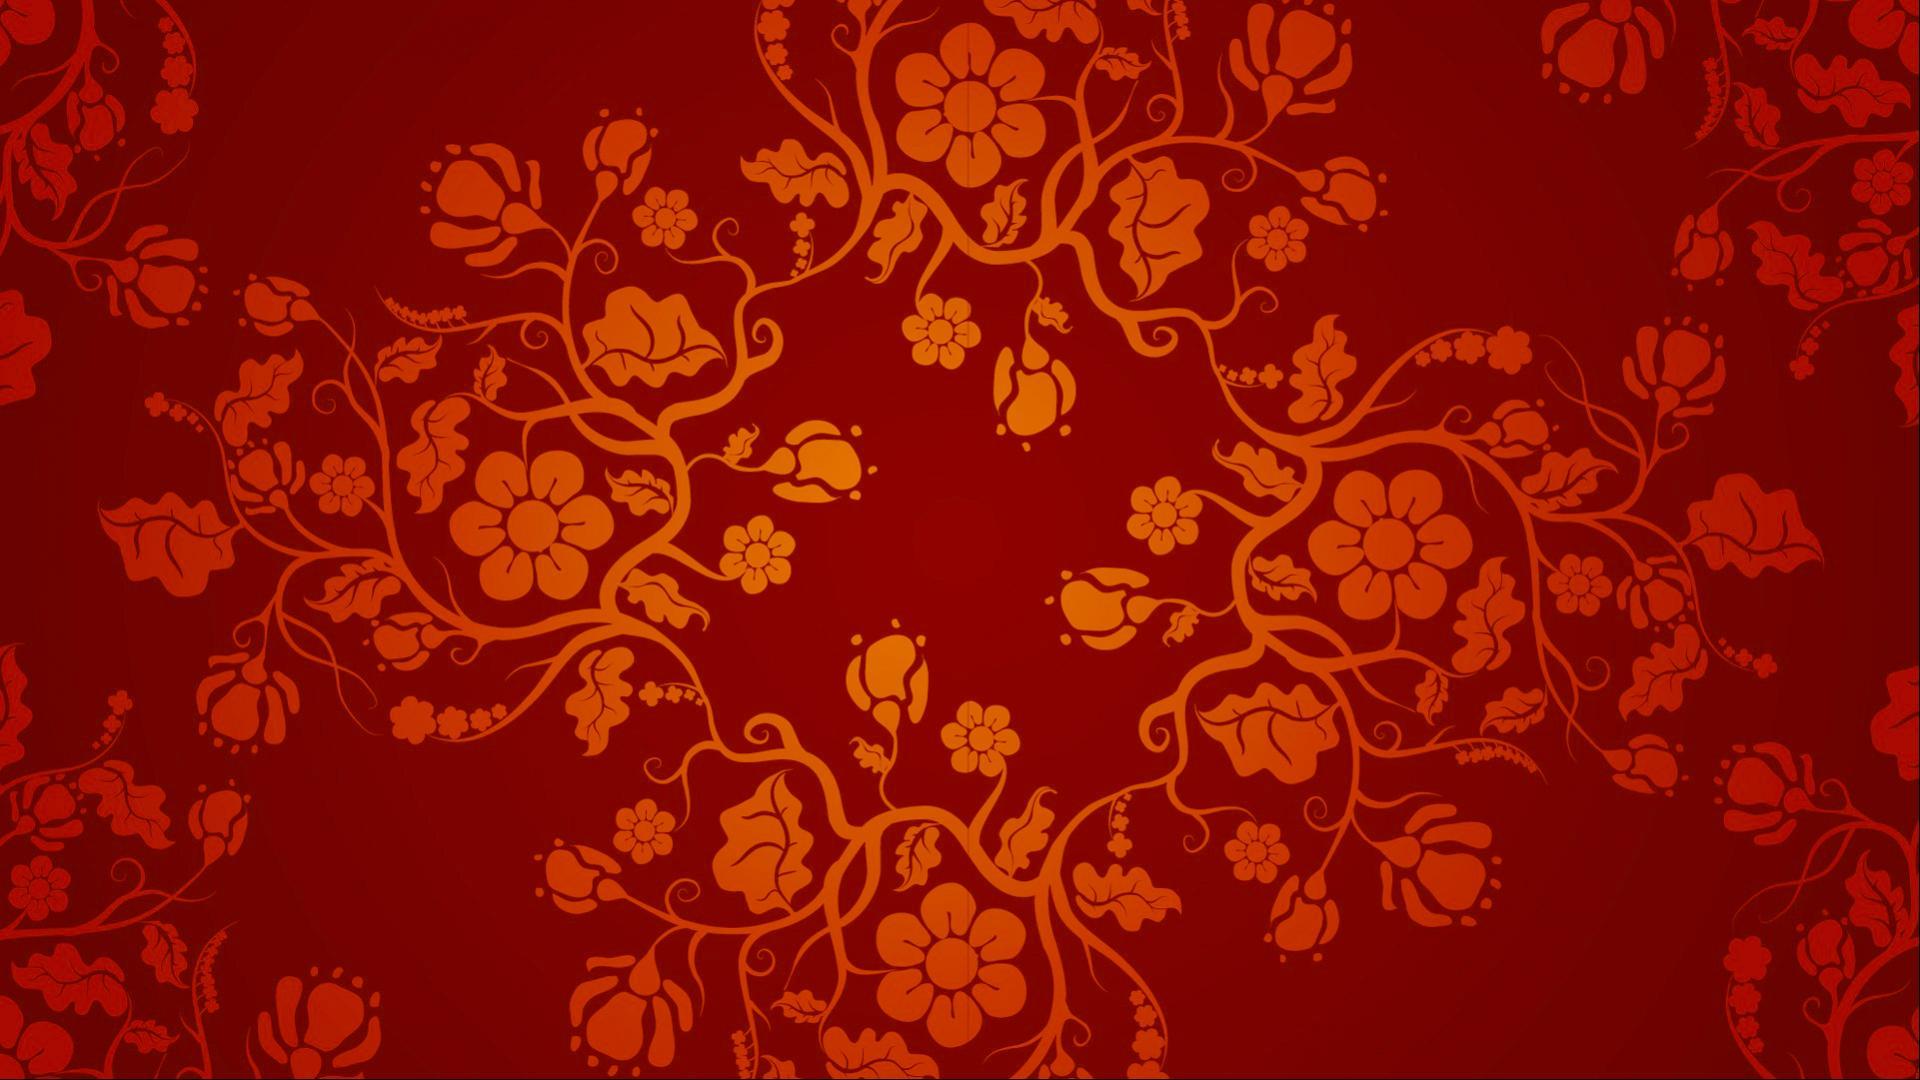 Red Chinese Wallpaper Designs 04 of 20 with Floral Pattern. HD